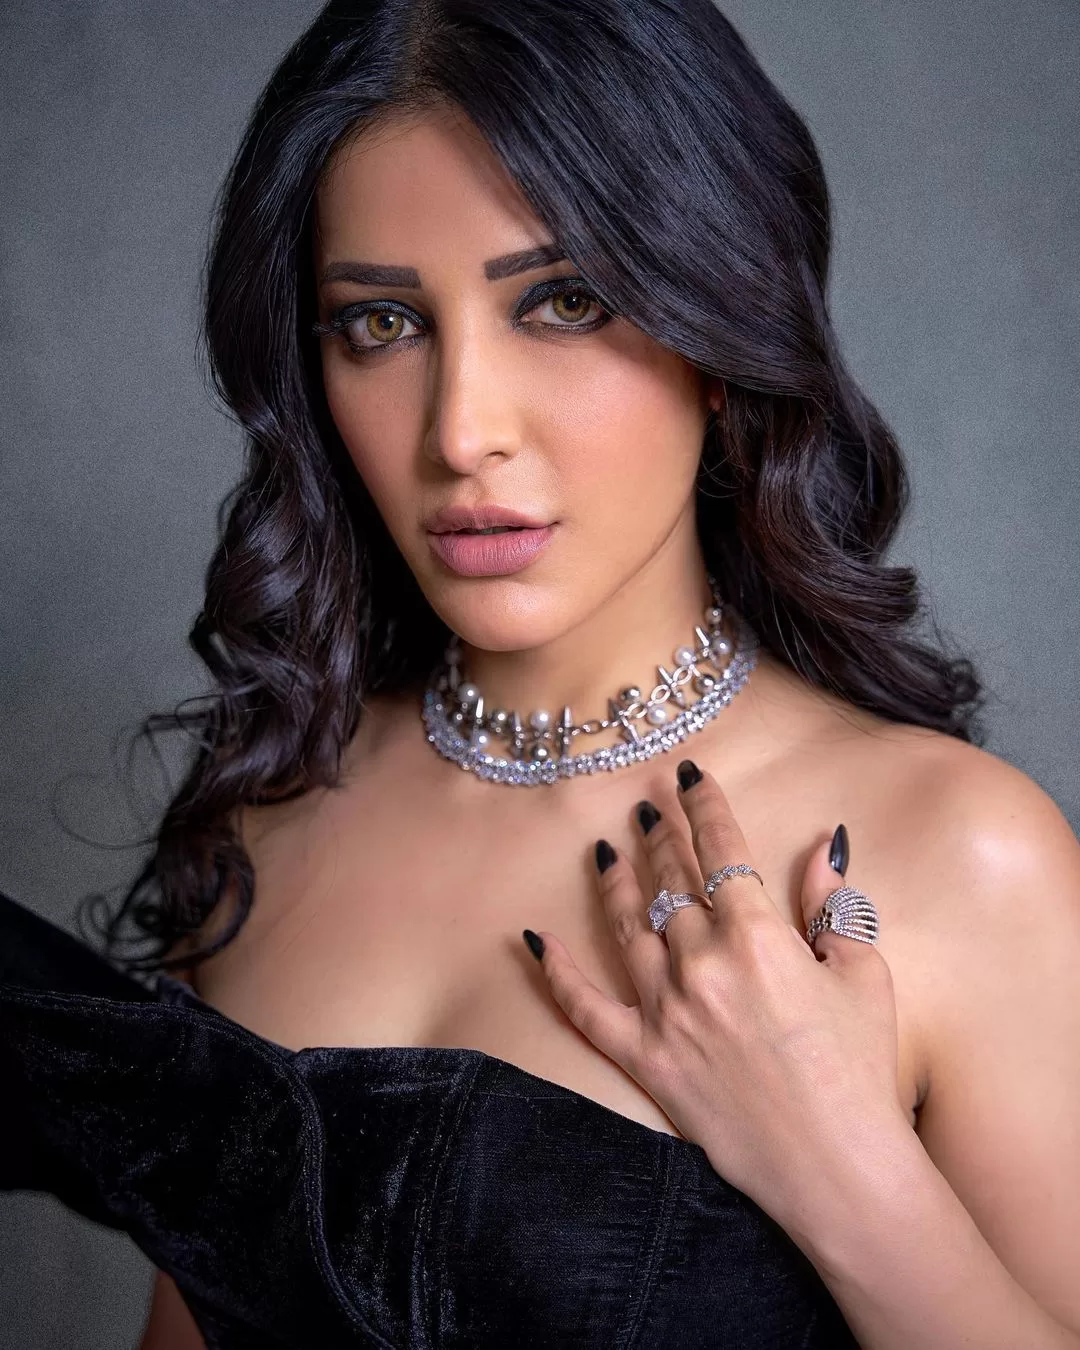 Shruti Hassan always wanted to drink with friends